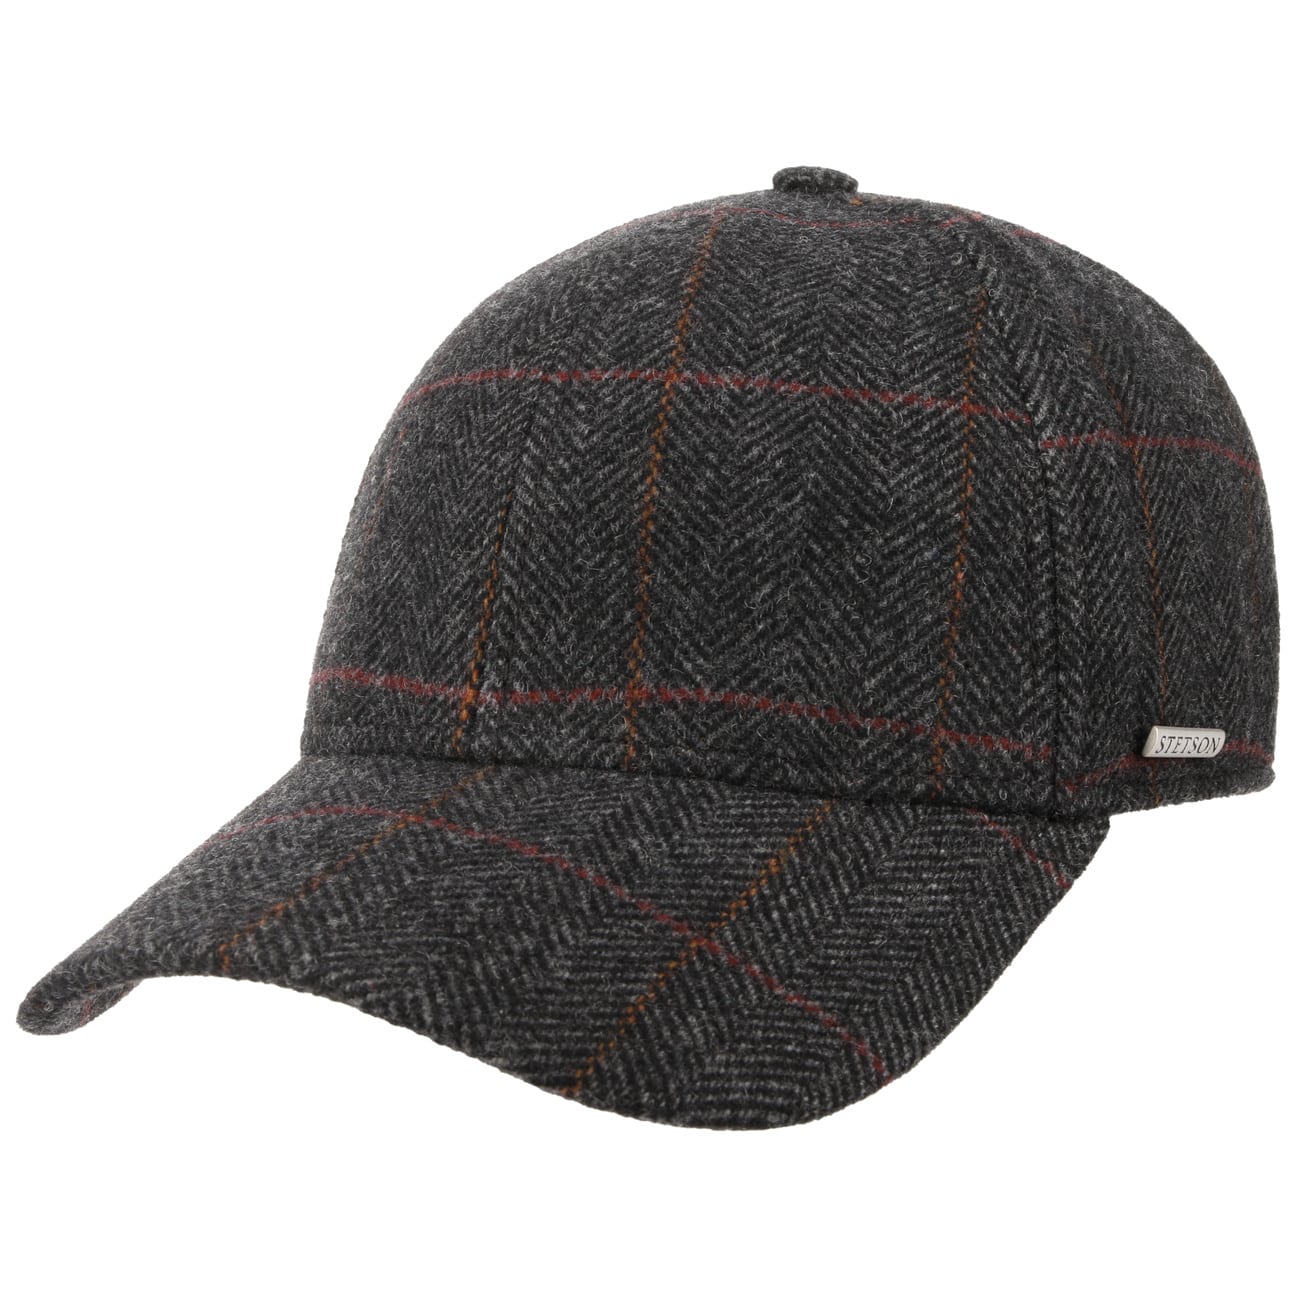 Kinty Wool 69,00 Basecap Stetson | mit € Ohrenklappen by